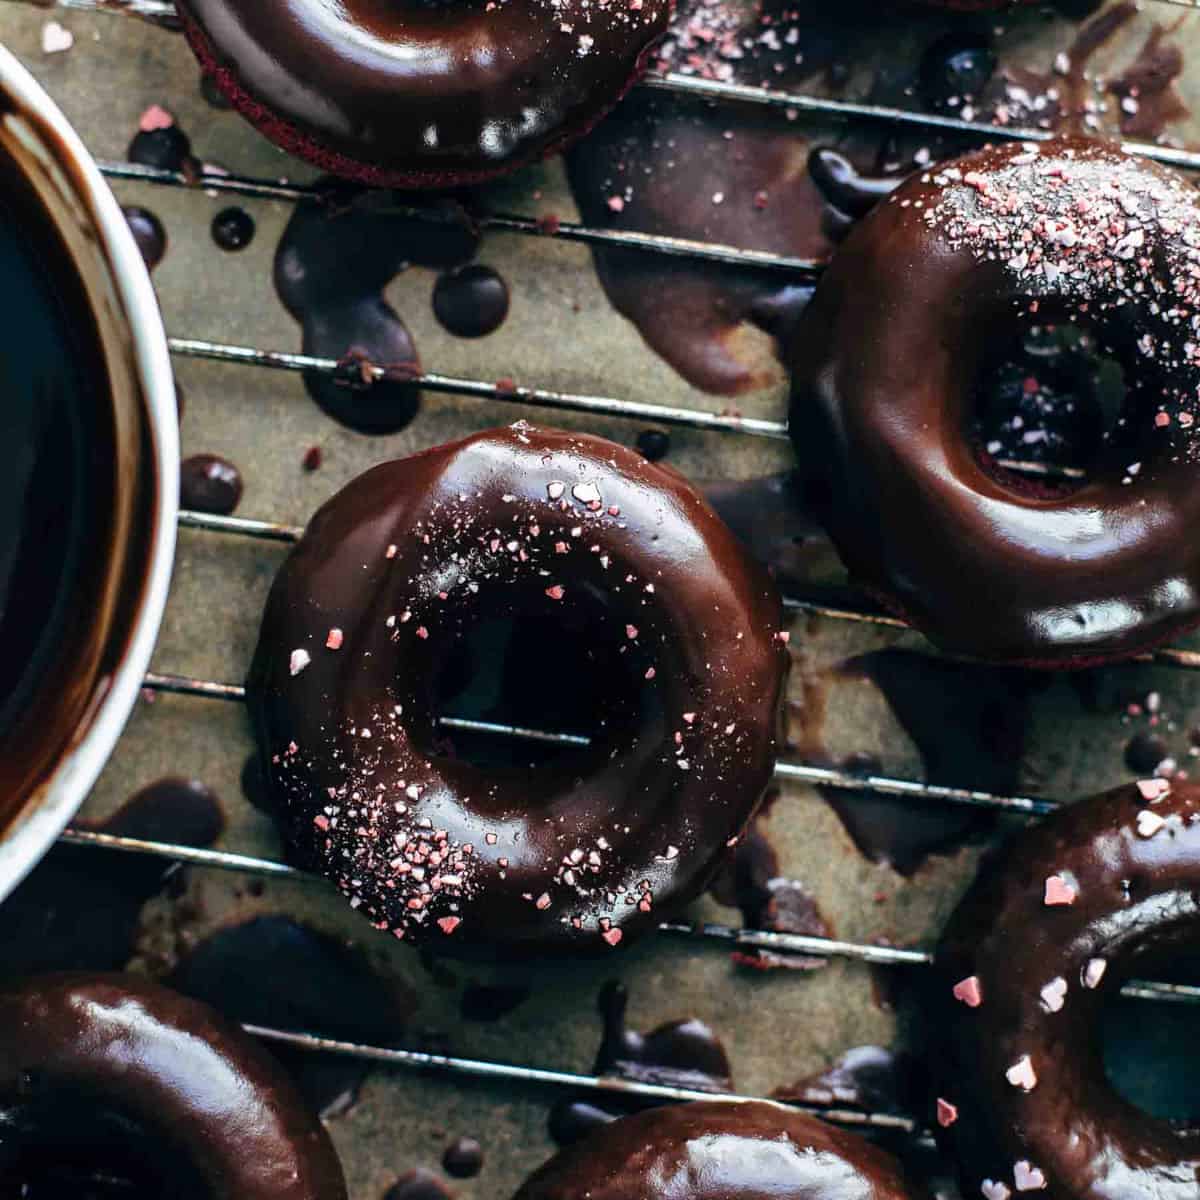 Baked red velvet cake donuts glazed with chocolate glaze on a wire rack